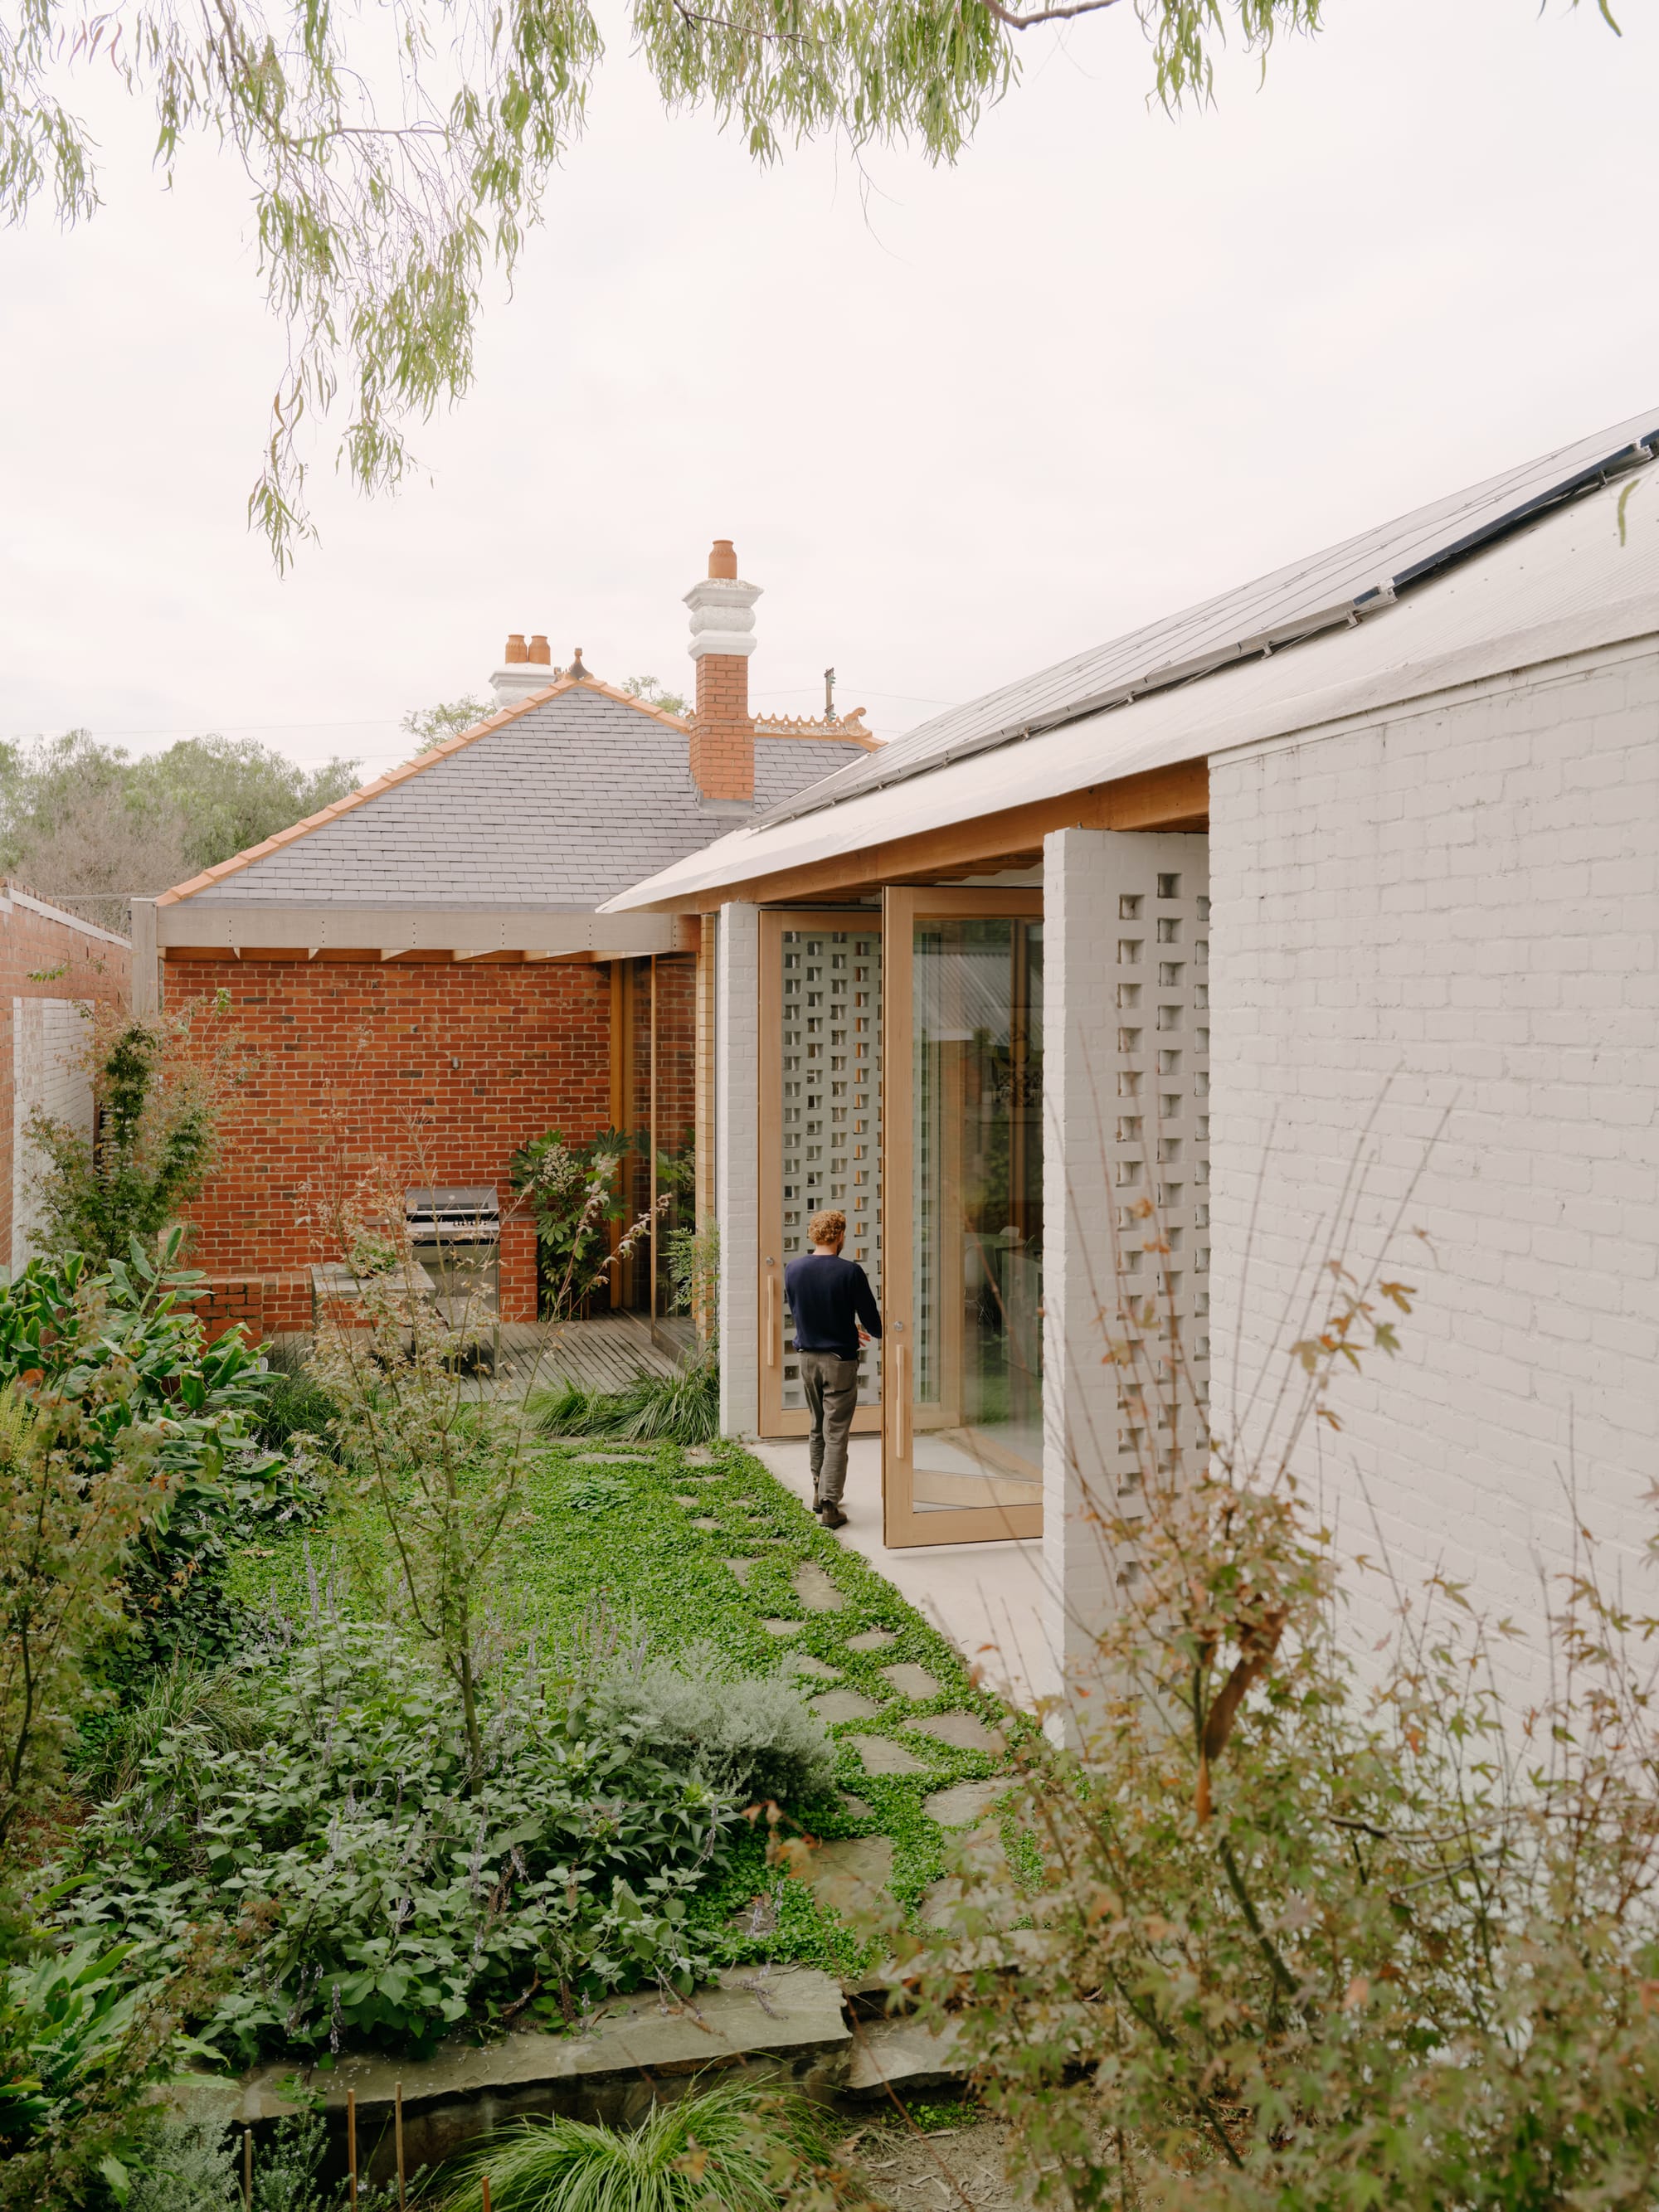 Corymbia by Karen Abernethy Architects. Photography by Tom Ross. Garden of residential home and outdoor area. Brick walls, timber deck at end of garden. Green grass and wild shrubs. 